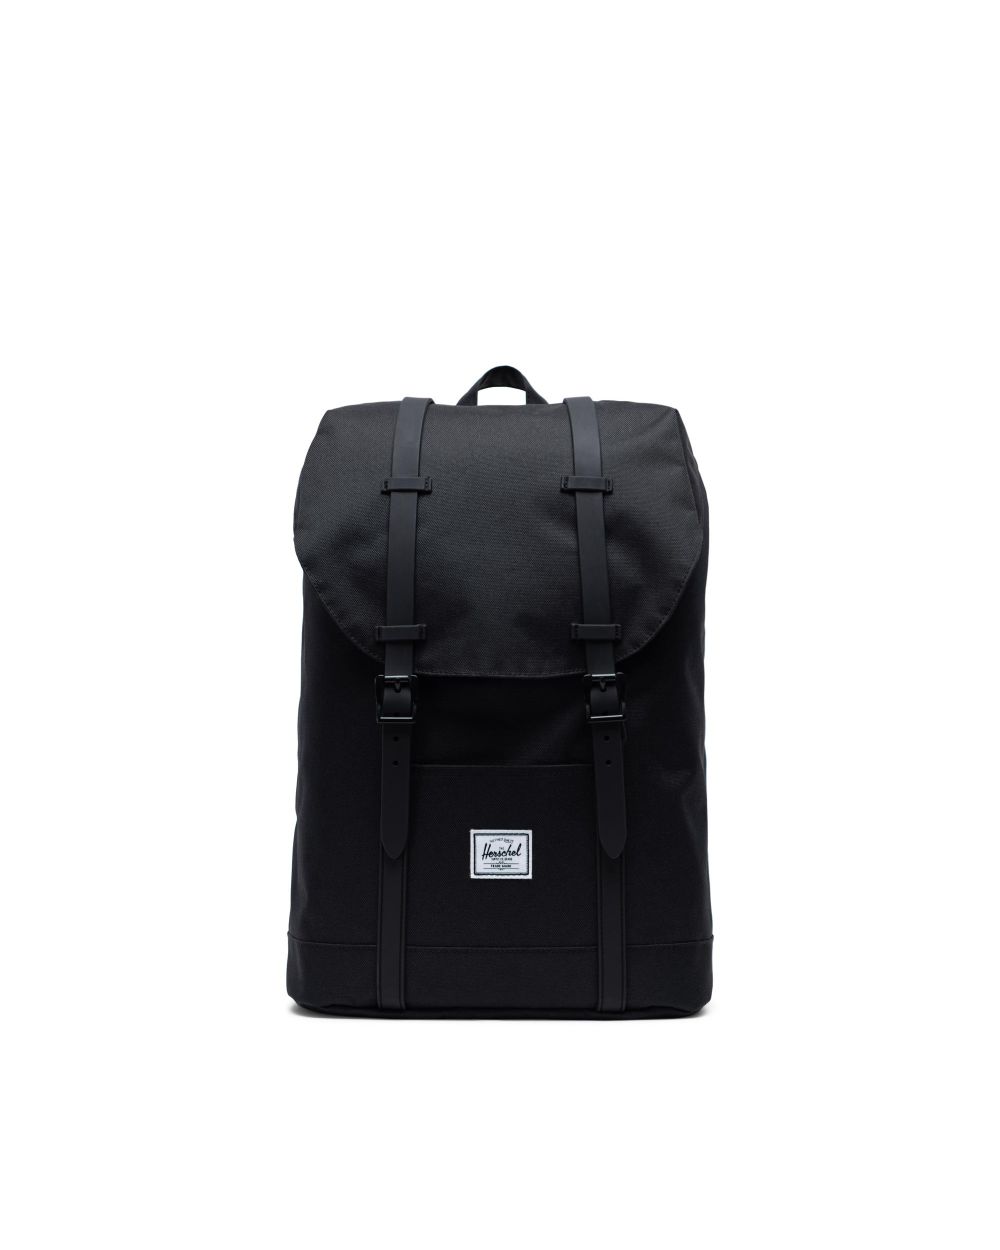 Retreat Backpack Youth | Herschel Supply Company